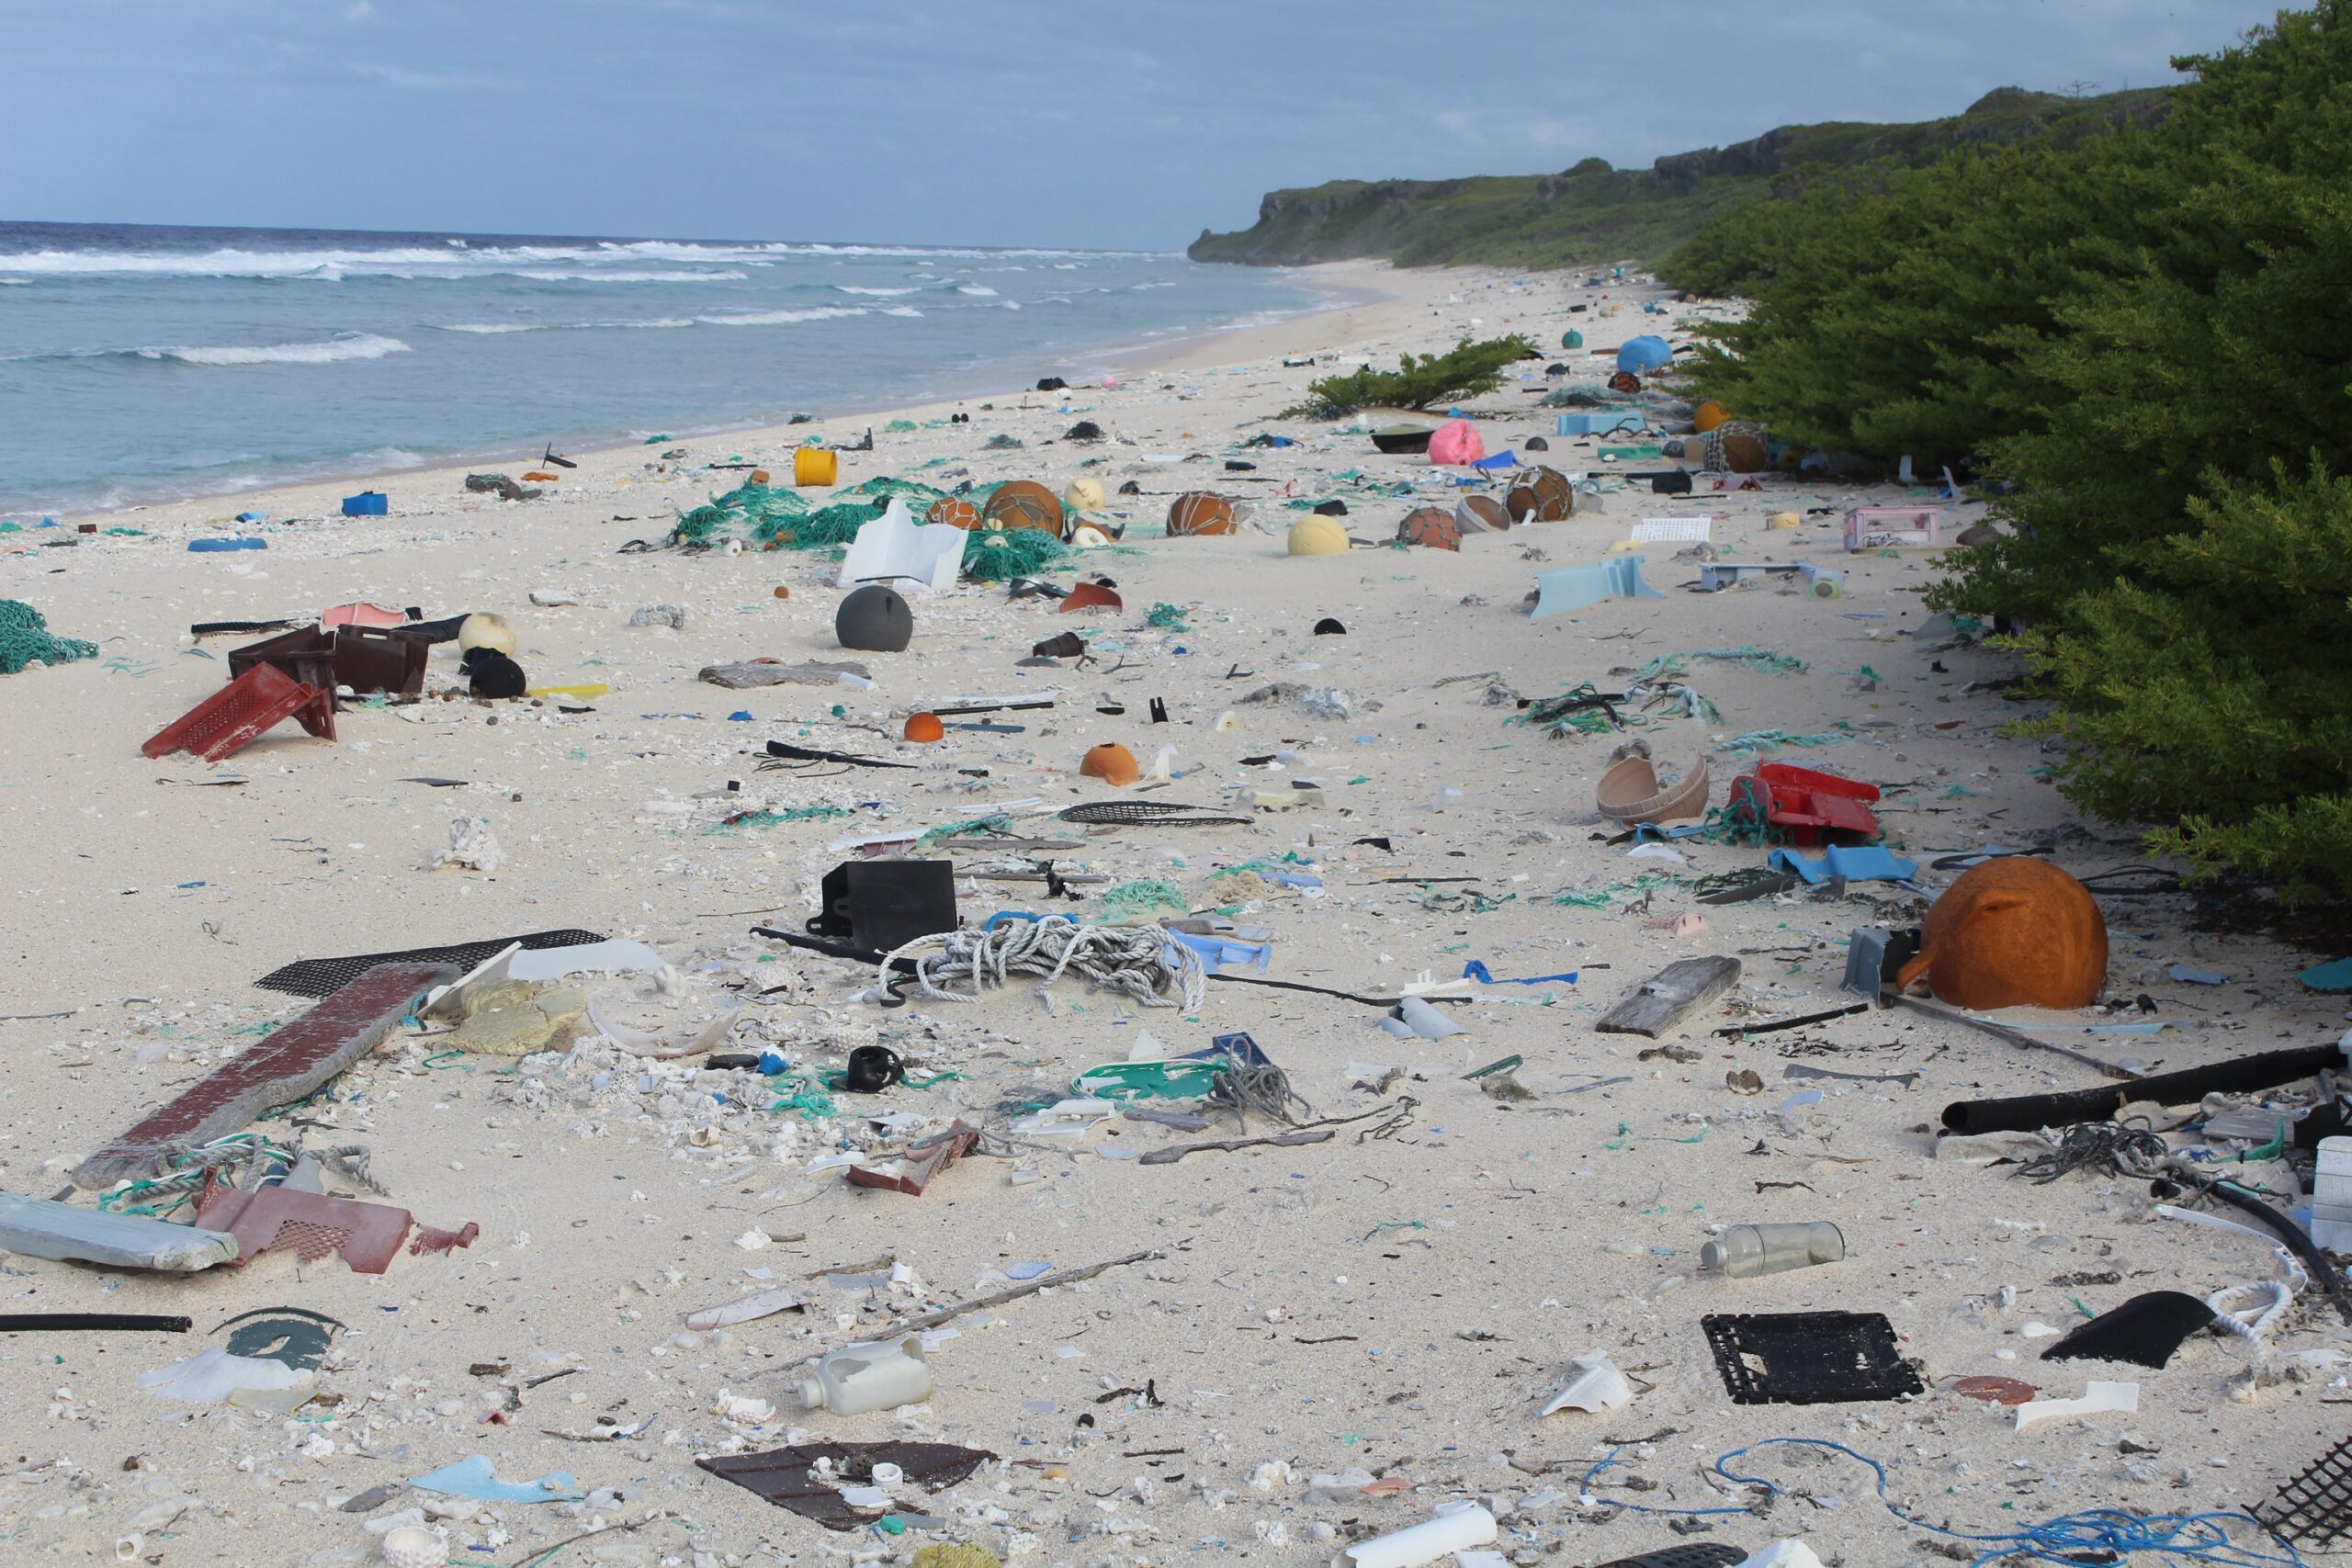 This remote island in the South Pacific is covered in 18 tons of our trash